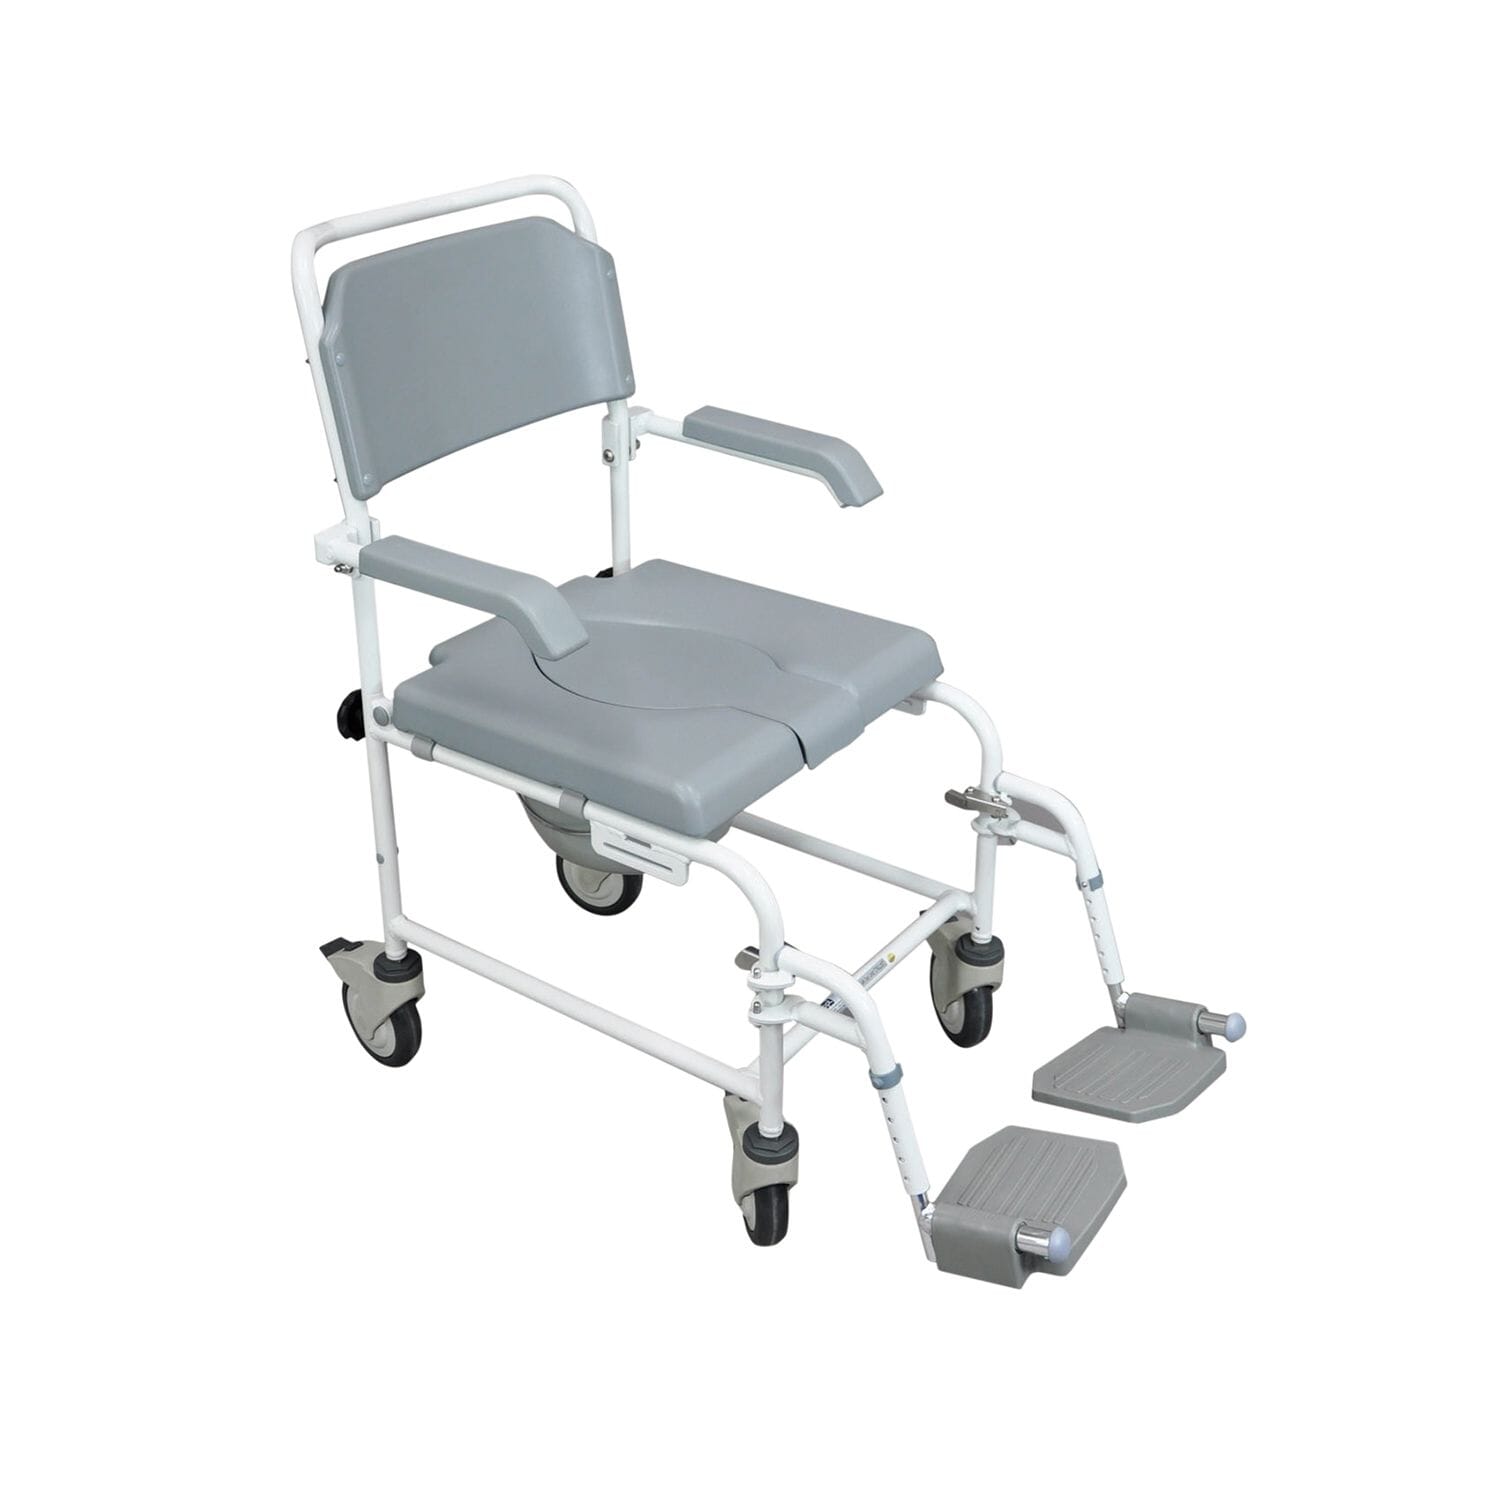 View Bewl Attendant Propelled Shower Commode Chair information